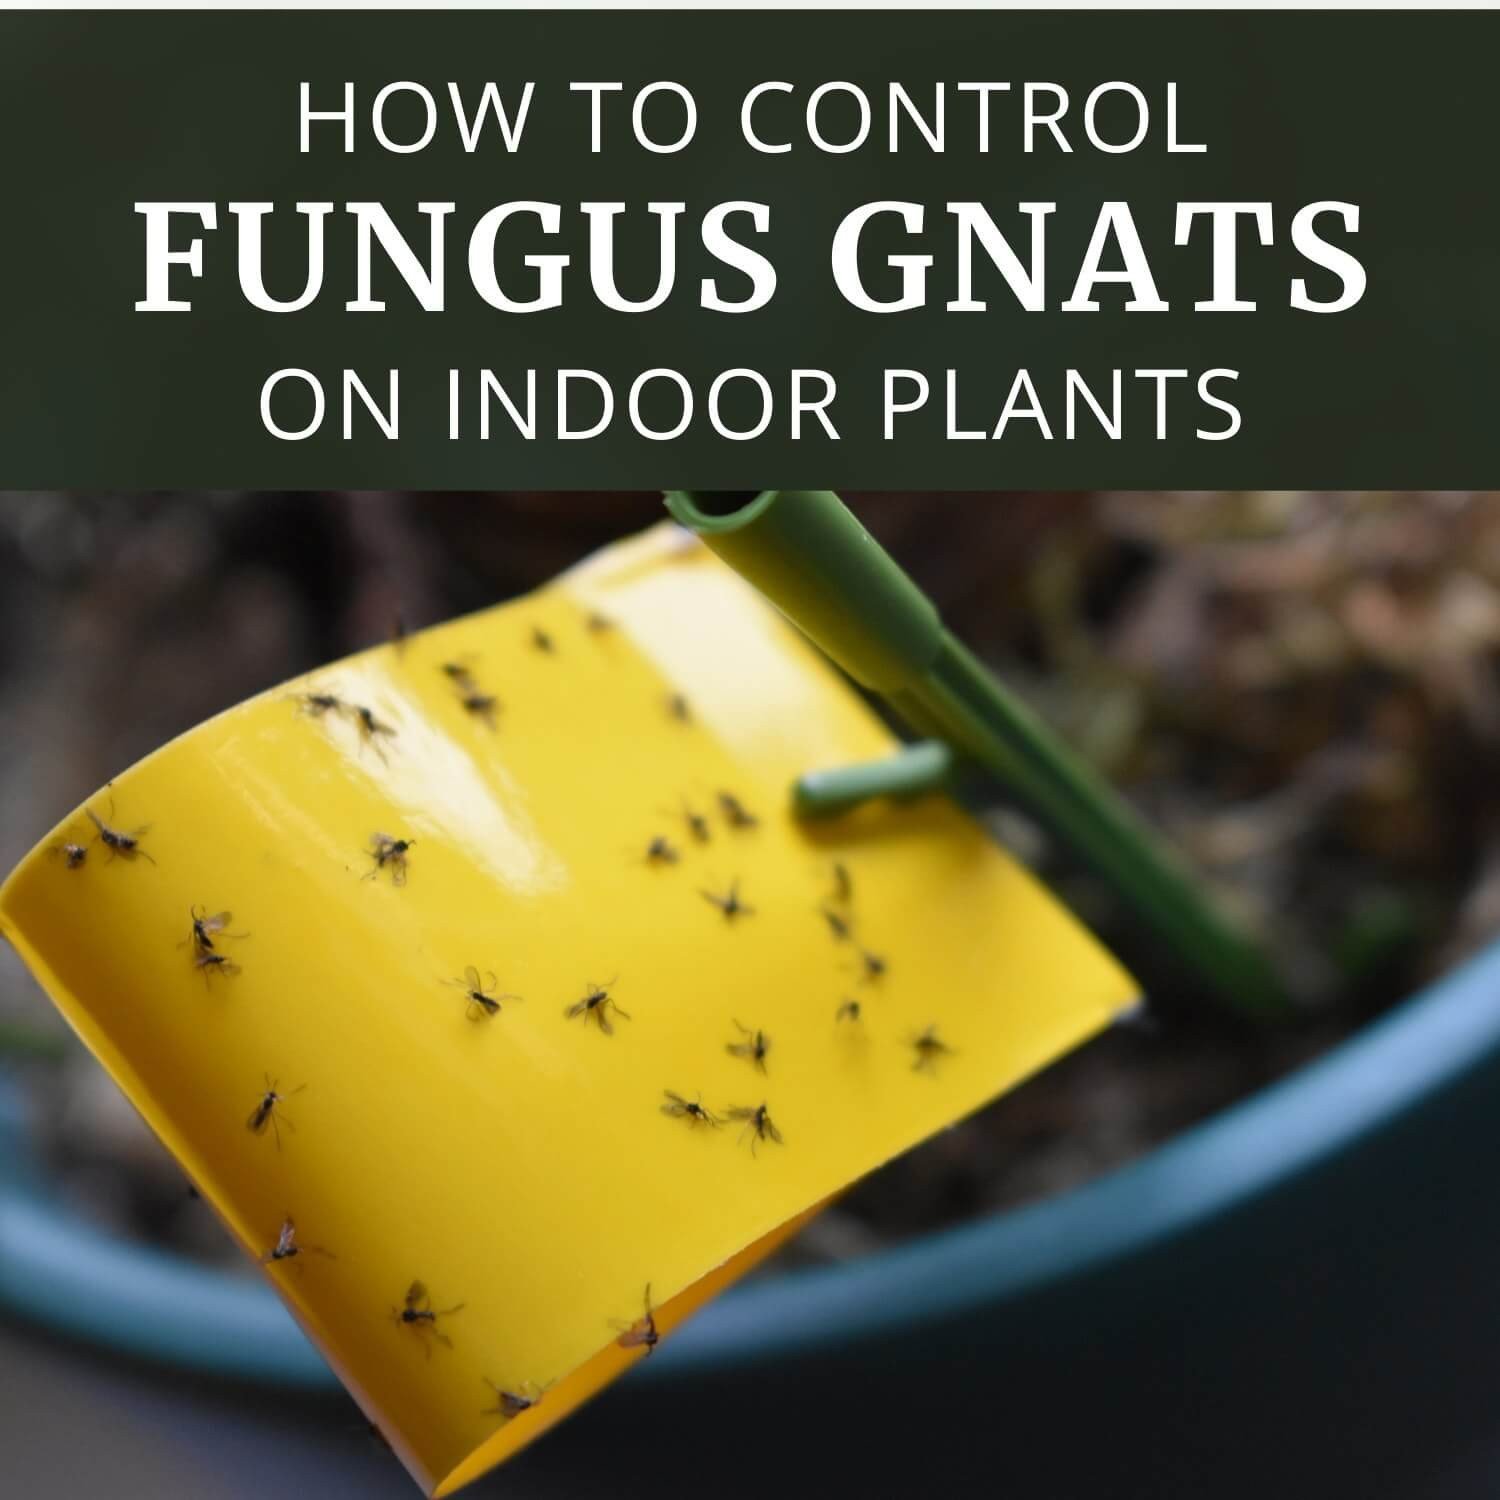 How To Get Rid Of Fungus Gnats In Houseplants (9 Ways) - Get Busy Gardening